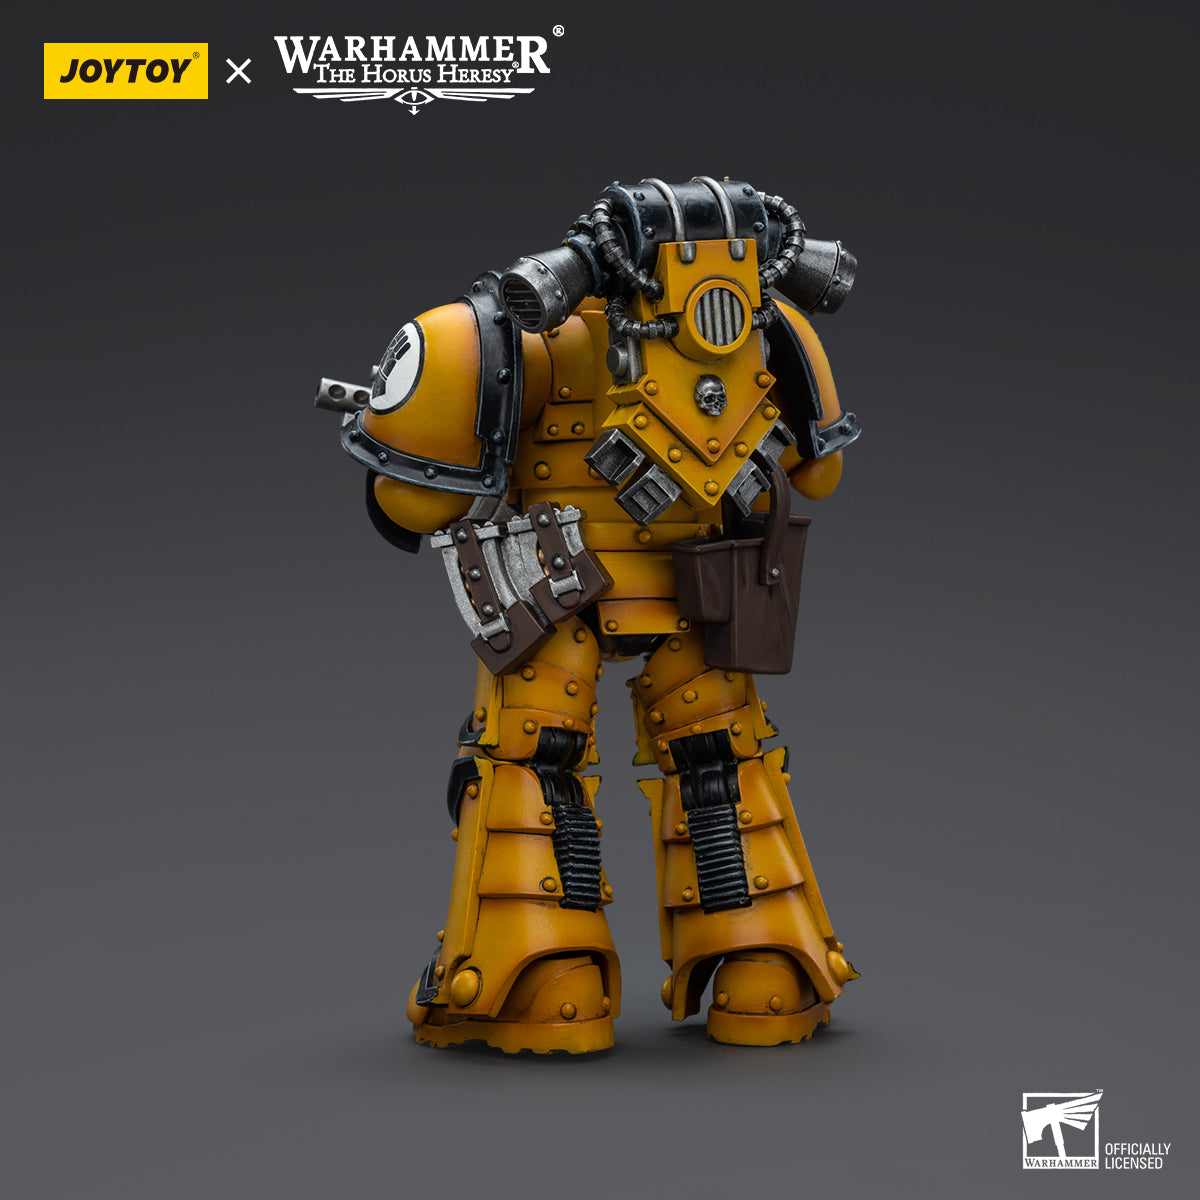 Warhammer Collectibles: 1/18 Scale Imperial Fists Legion MkIII Tactical Squad Legionary with Bolter